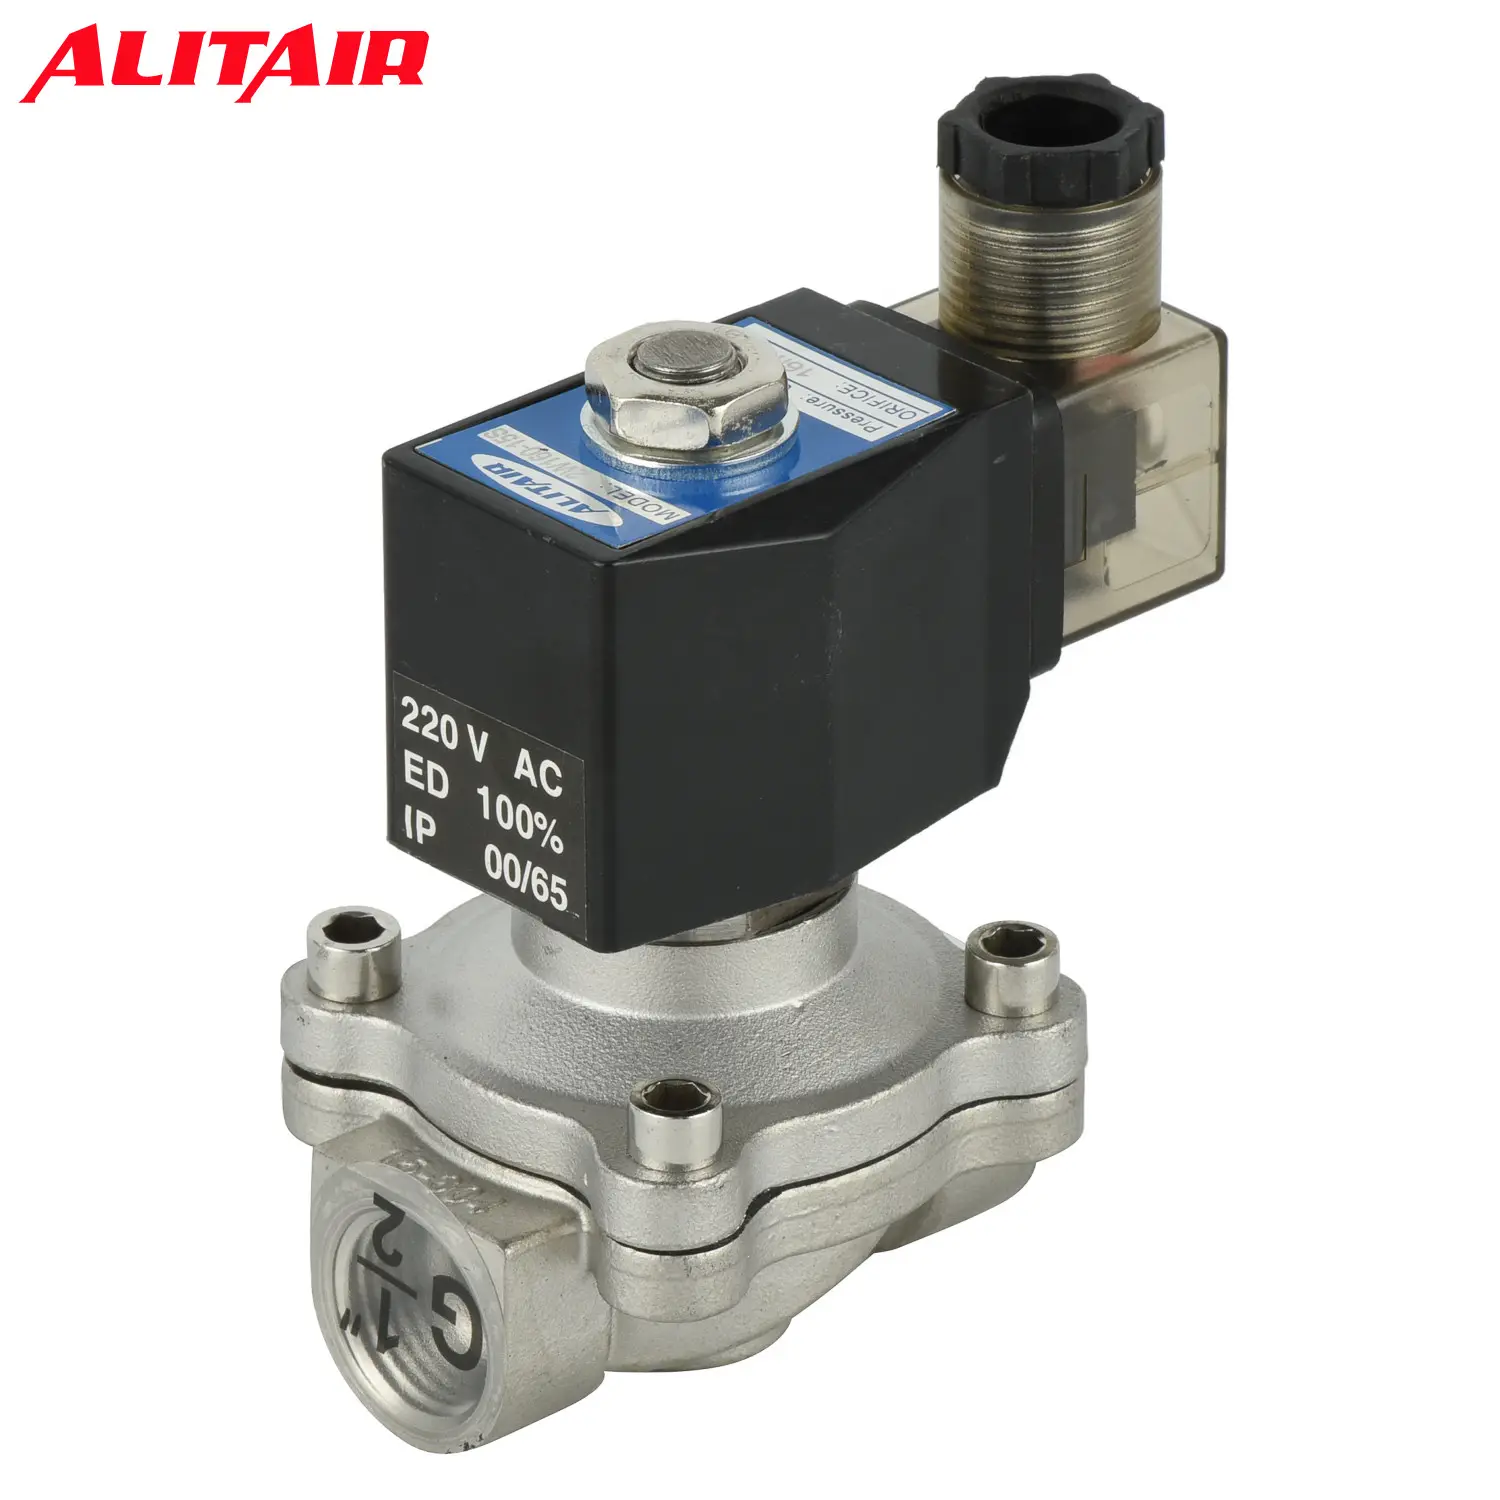 2/2 Way Direct Acting 2S160-15 Normally Closed Unid Us-15 Air Water Oil Gas Solenoid Valve